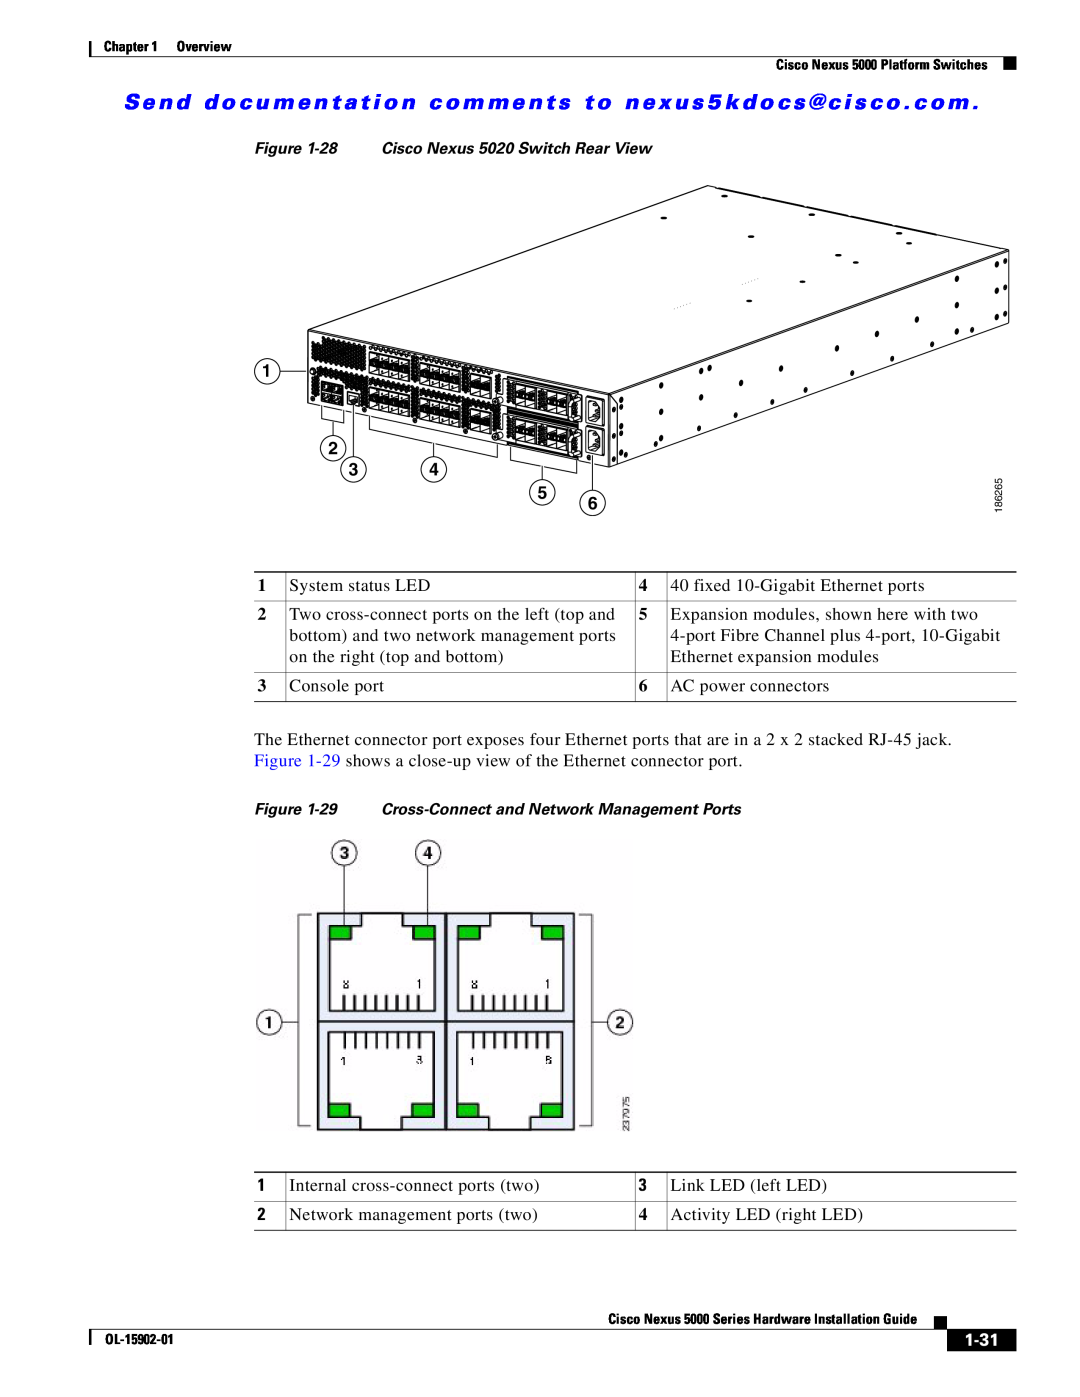 Cisco Systems 5000 manual 1-31, 28 Cisco Nexus 5020 Switch Rear View, 29 Cross-Connect and Network Management Ports 